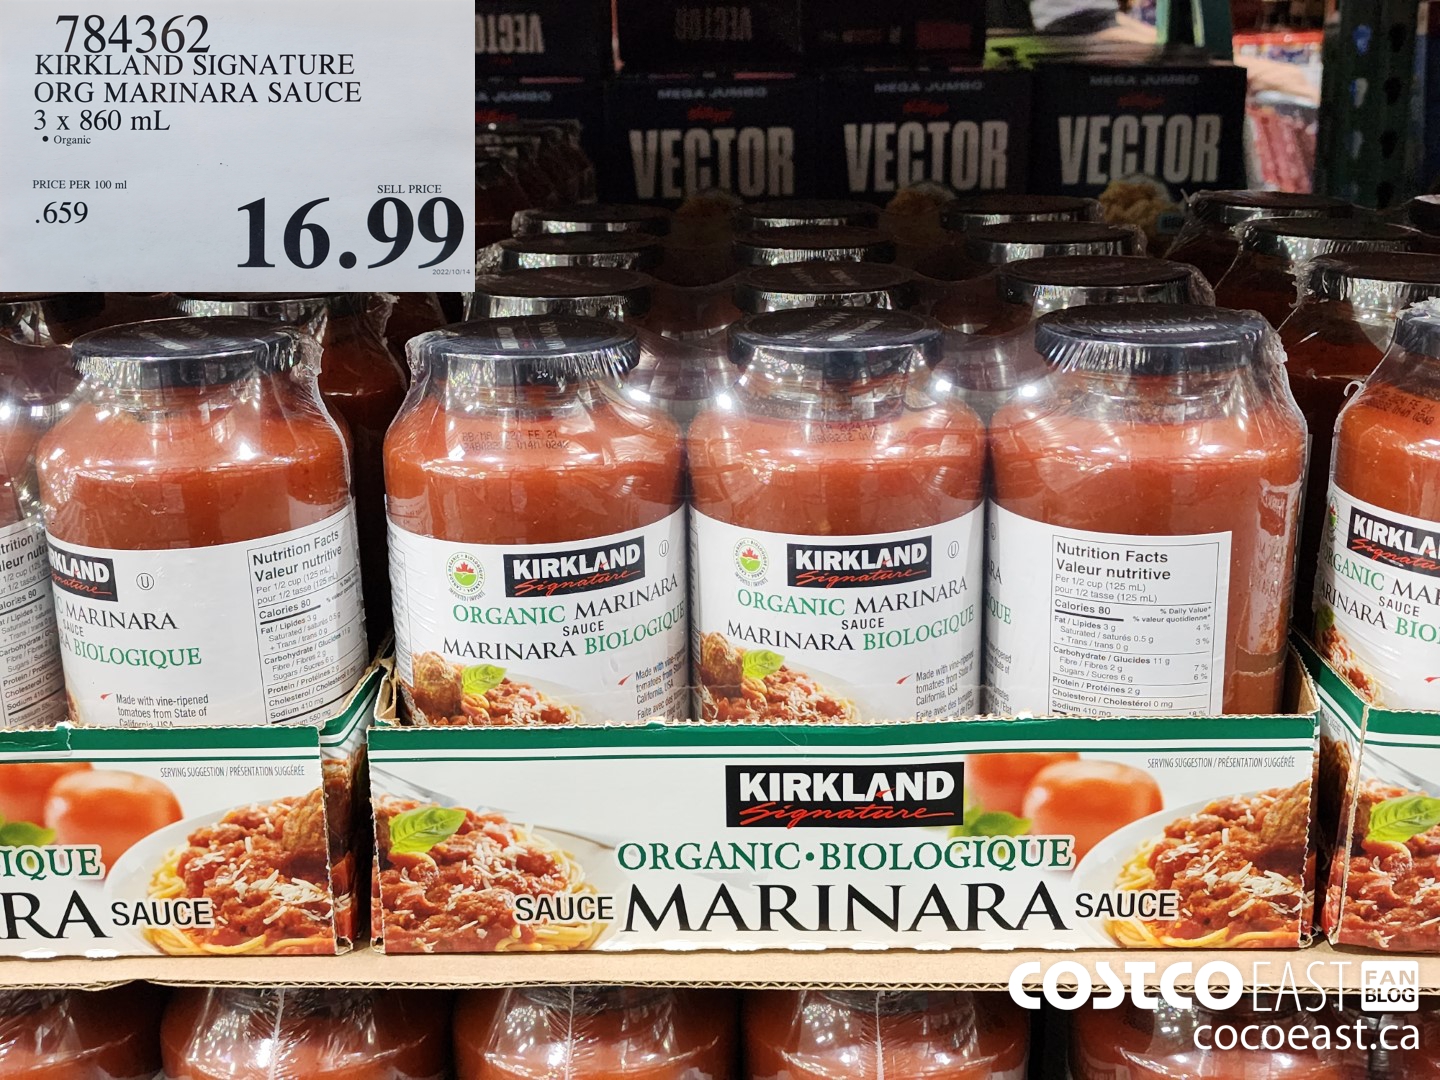 Costco East Super Post: The Pantry & Dried good aisles Oct 26th